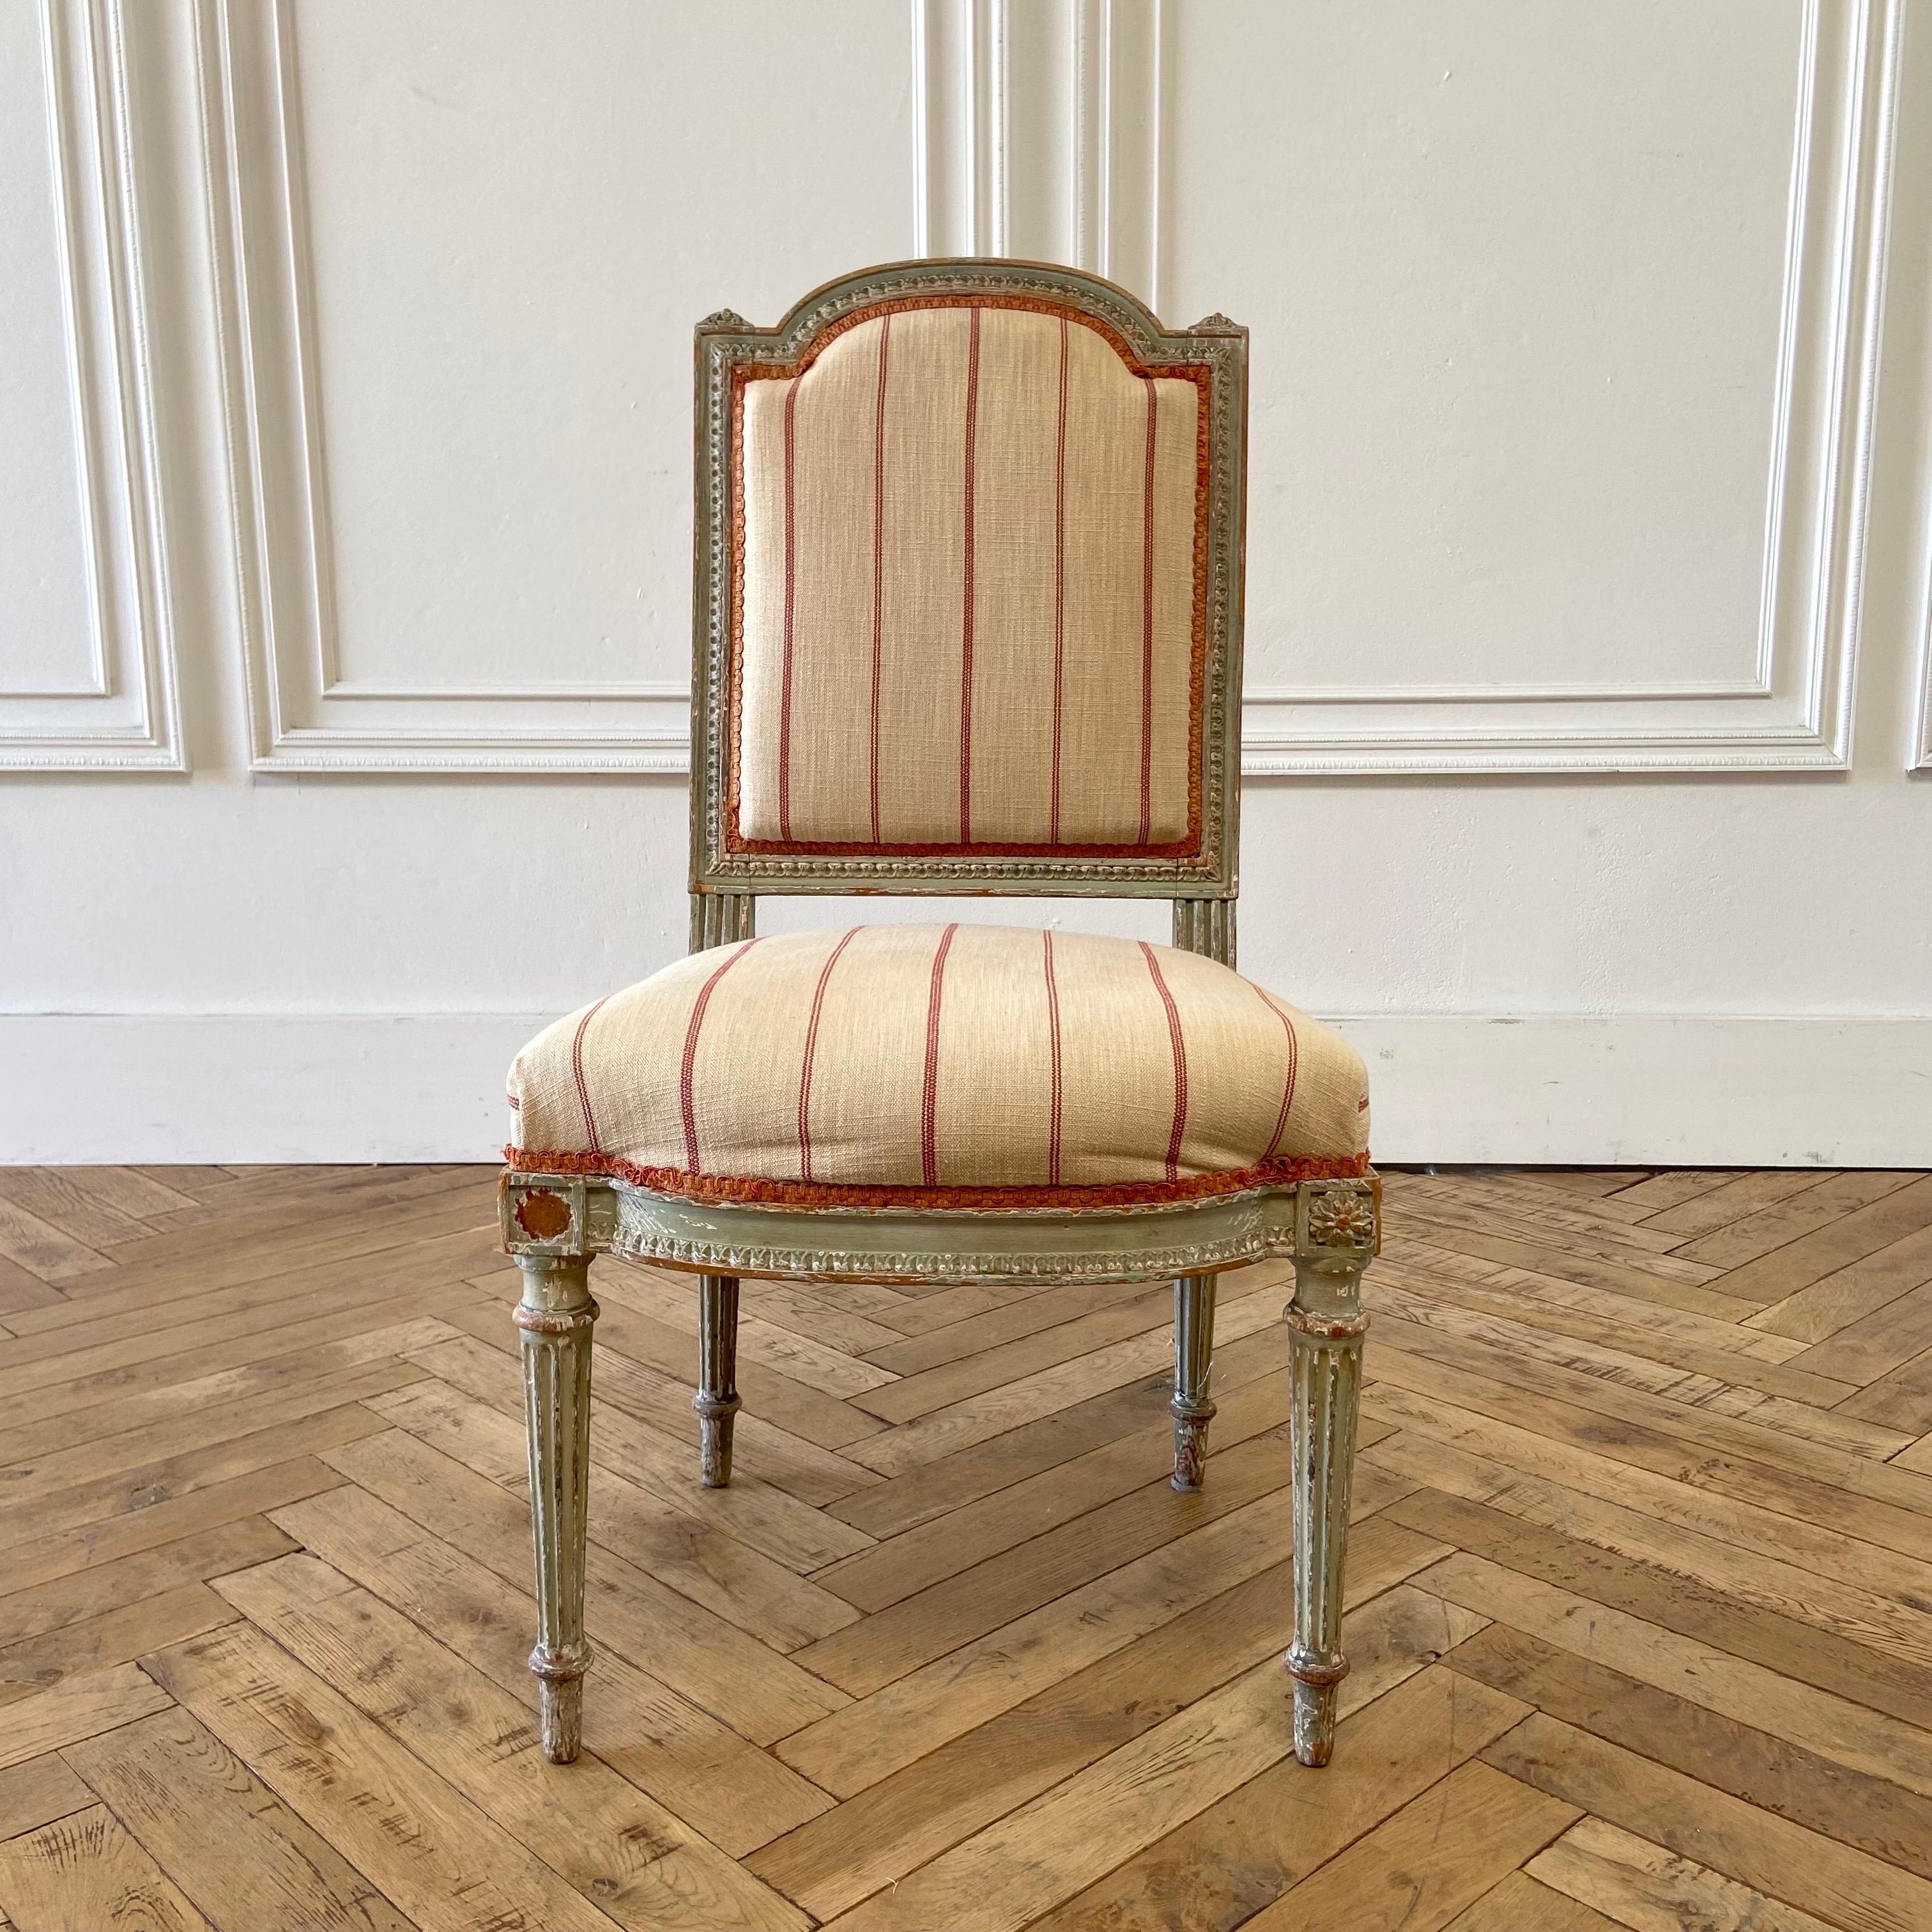 Beautiful painted Louis XVI style chair with upholstered seat and back.
The faded painted finish is original, in a french gray-blue green color, with exposed wood. Can be reupholstered for an additional fee.

Antique accent chair 19”W x 21”D x